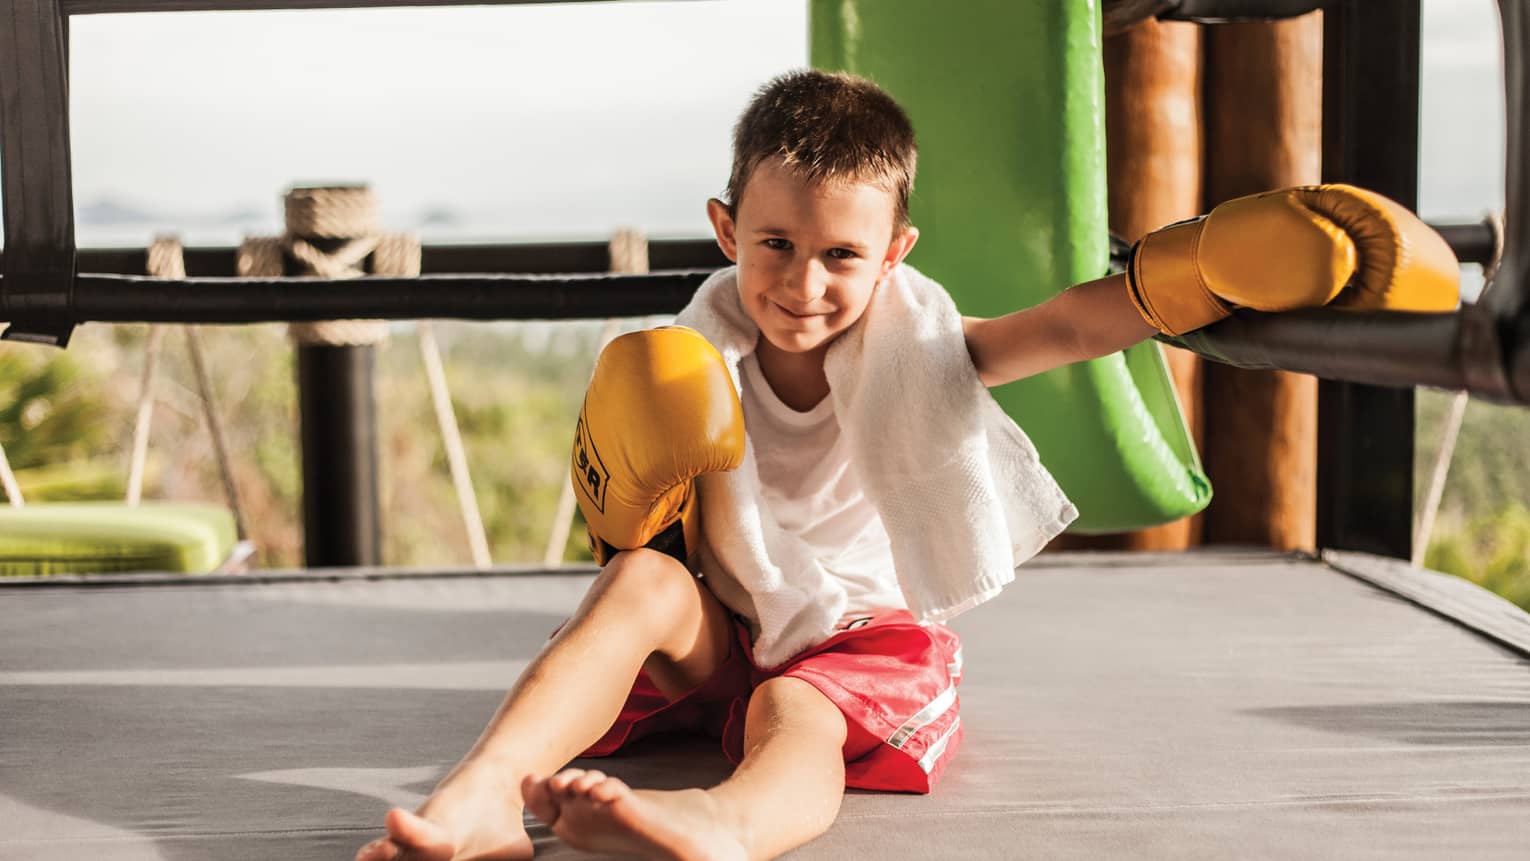 Smiling young boy with white towel around neck, boxing gloves sits in sunny outdoor ring